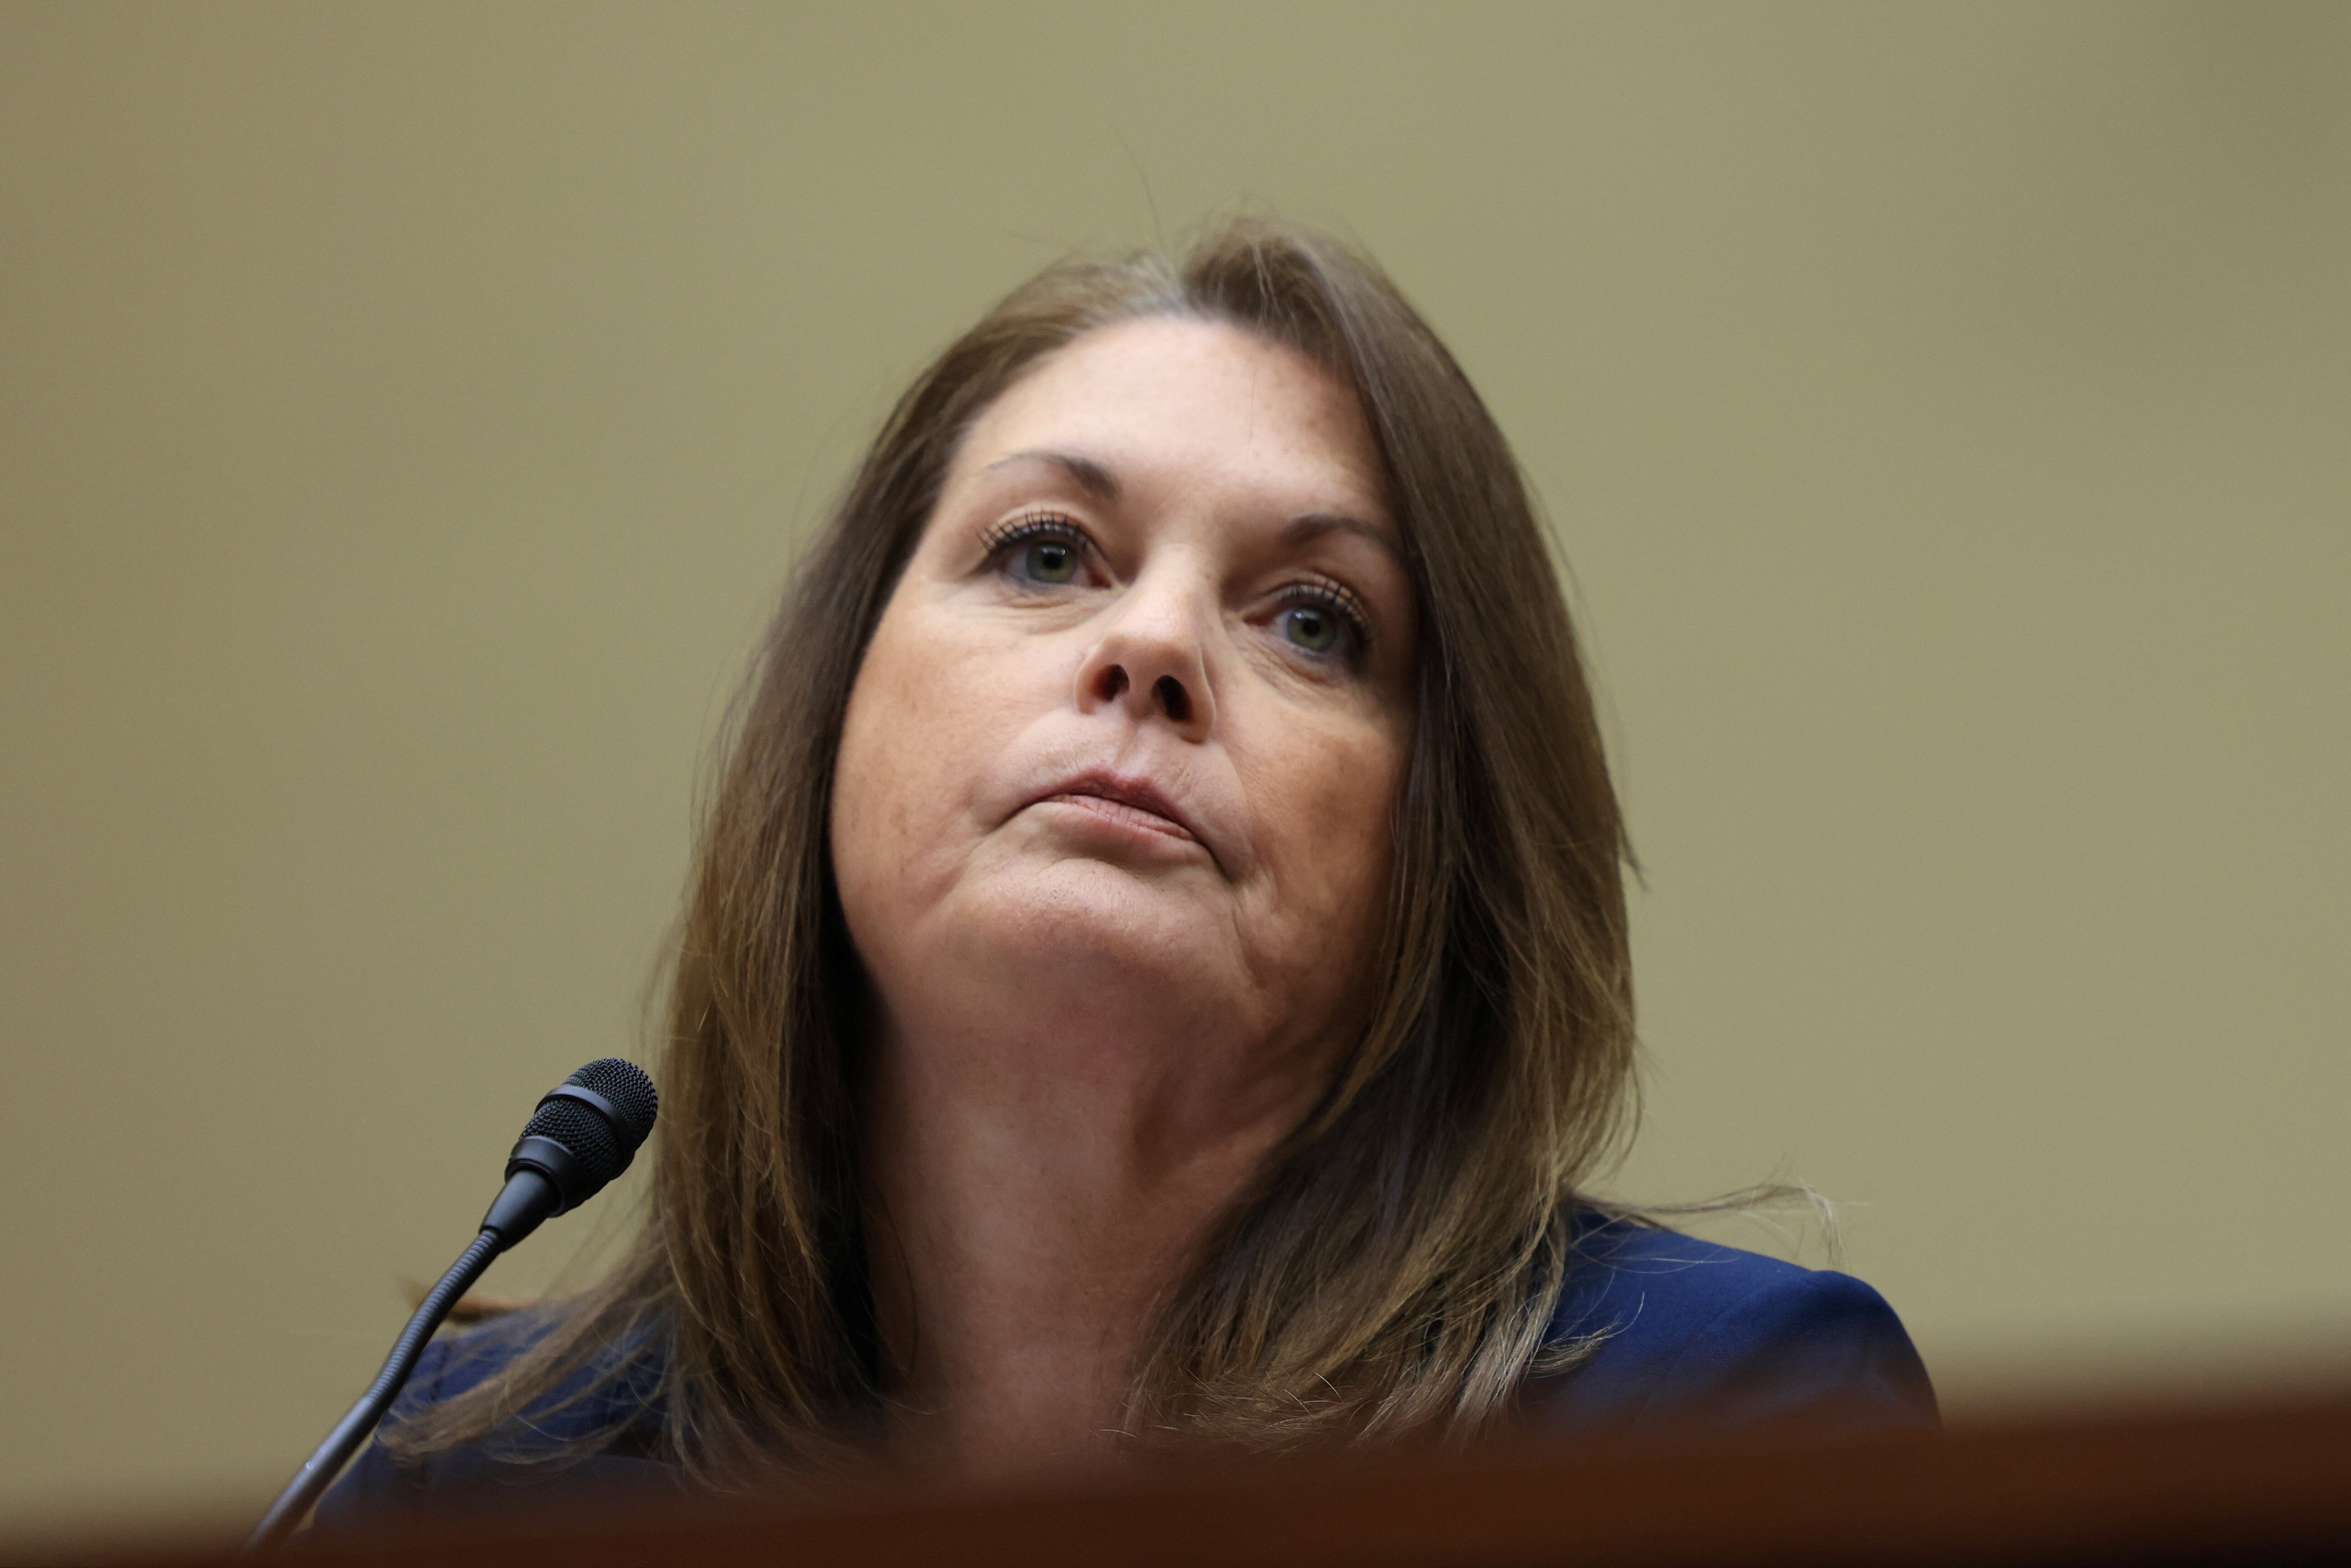 Secret Service Director Kimberly Cheatle said Monday that her agency failed in its mission to protect former President Donald Trump during a highly contentious congressional hearing with lawmakers of both major political parties demanding she resign over security failures that allowed a gunman to scale a roof and open fire at a campaign rally. (credit: Reuters)